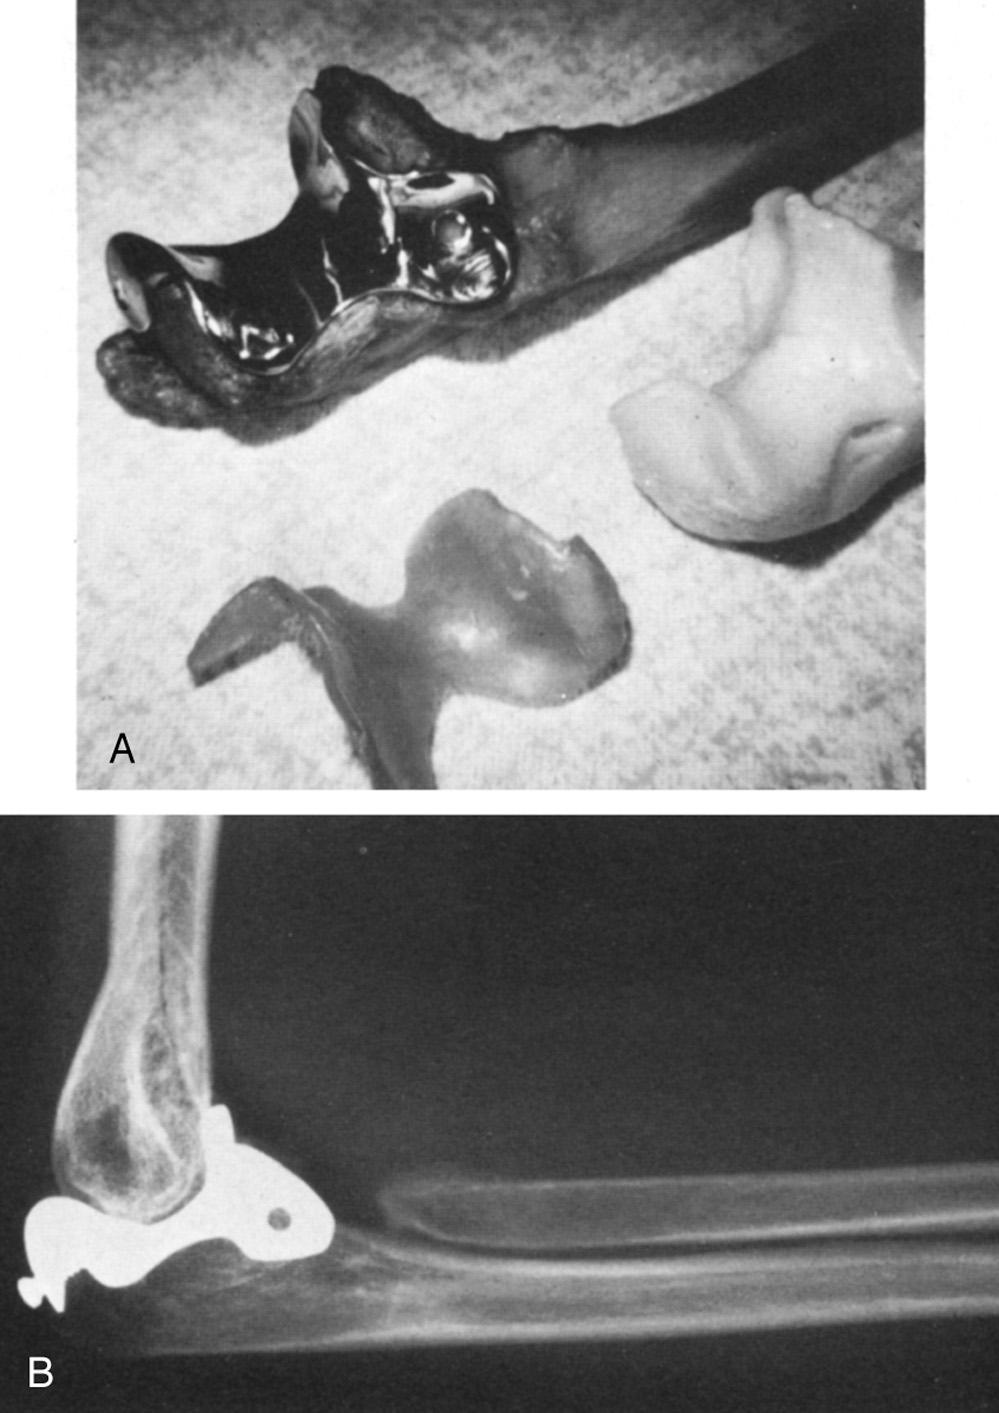 FIG 85.5, (A) A Vitallium “saddle” designed by Bickel and Peterson to resurface the proximal end of the ulna. (B) Fifteen-year follow-up of a patient with posttraumatic arthritis treated with the Vitallium saddle. There was mild pain and motion from 80 to 135 degrees.